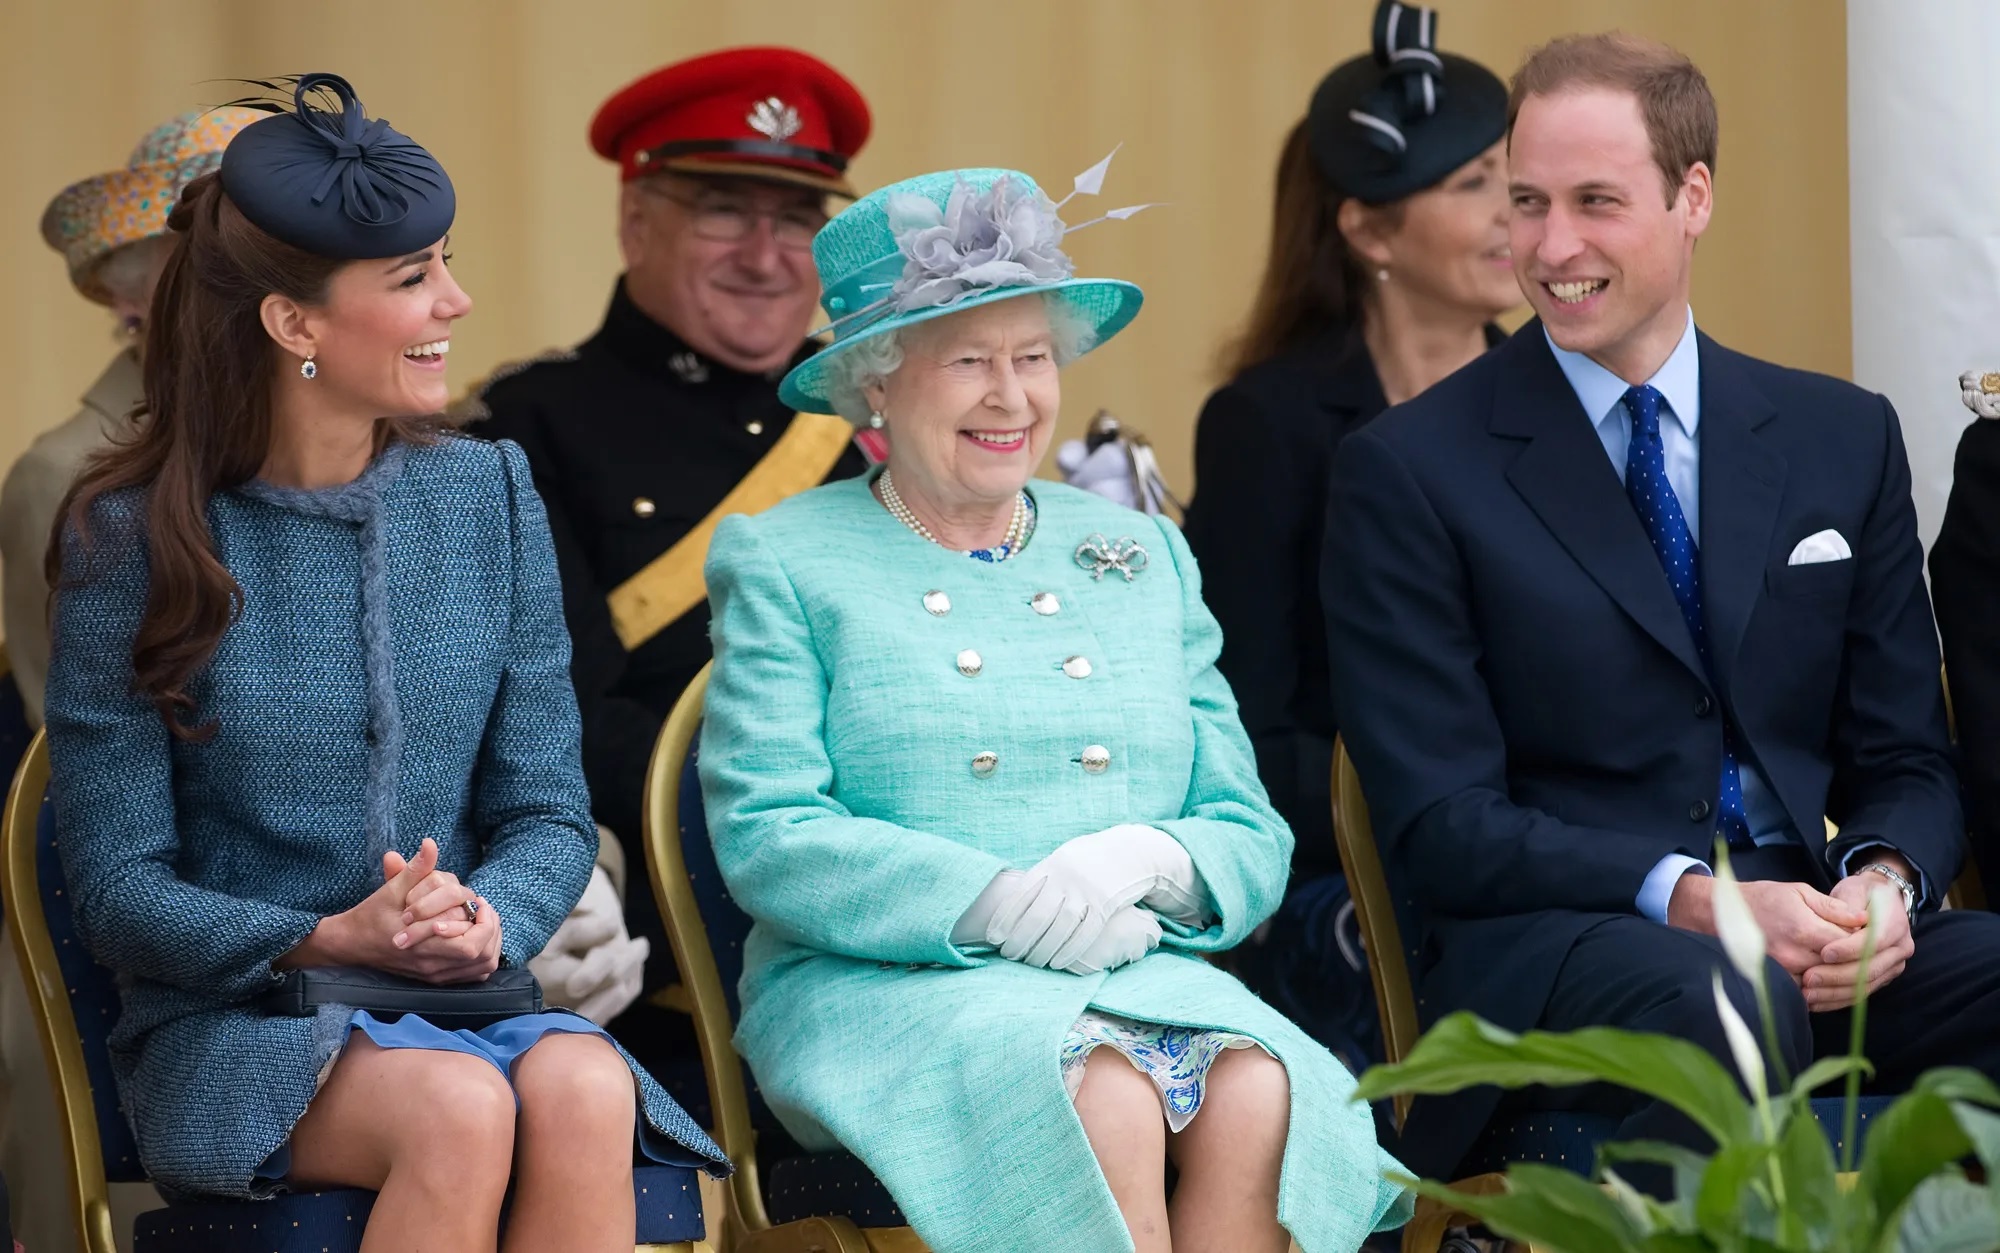 Kate Middleton win big from Queen Elizabeth 11, While Meghan, Camilla get nothing.